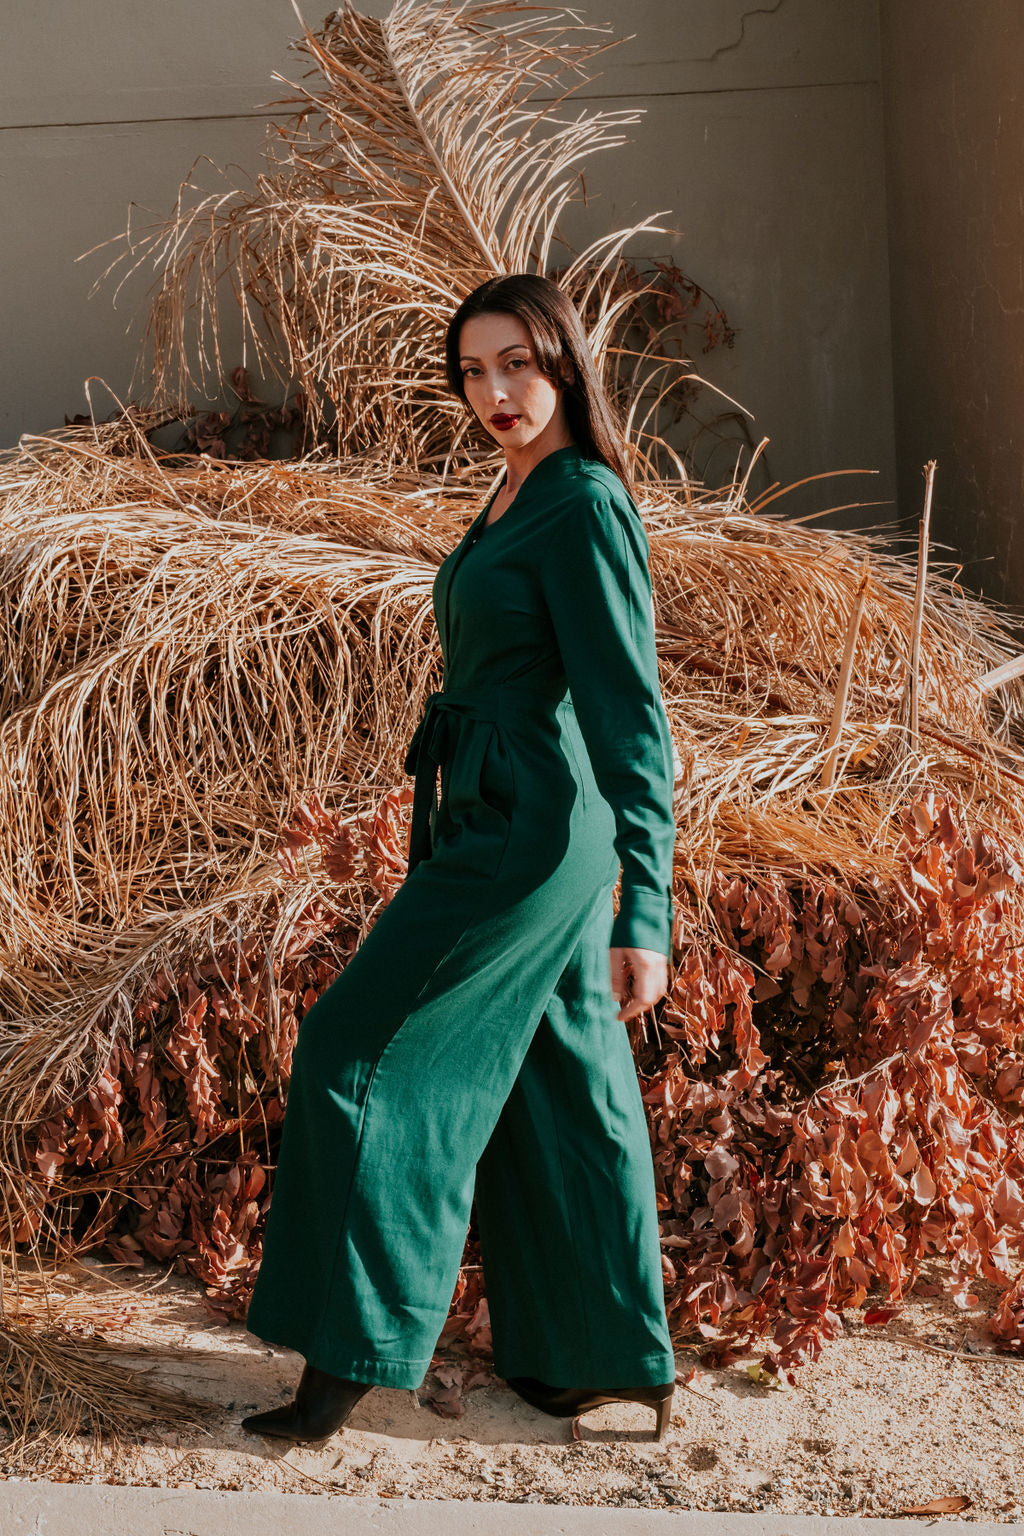 Made from a soft, breathable Rayon/Linen blend fabric, the Anneen Henze Jumpsuit will be your go-to item this season. Featuring a mandarin collar with button placket with press studs, long sleeves with cuff detail and a wide-legged bottom with pockets. The jumpsuit also have a self fabric tie that can be tied to the front and back. Darts were added to the back and front of the top and bottom to create the most romantic silhouette. This is truly an investment piece.